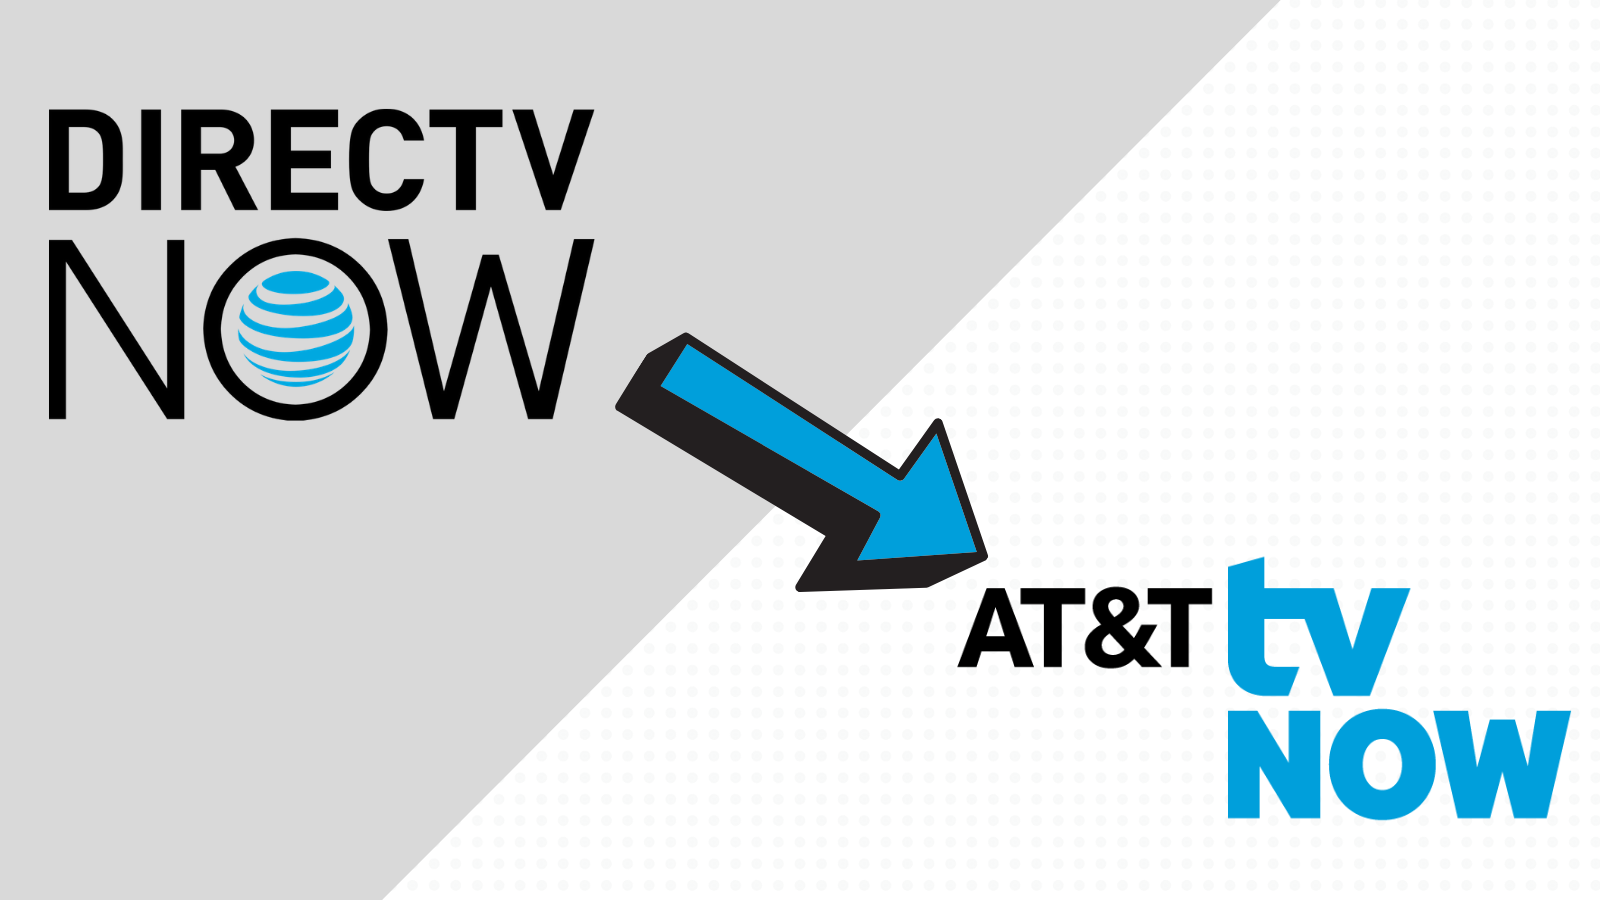 AT&T DirecTV NOW Blank Meme Template